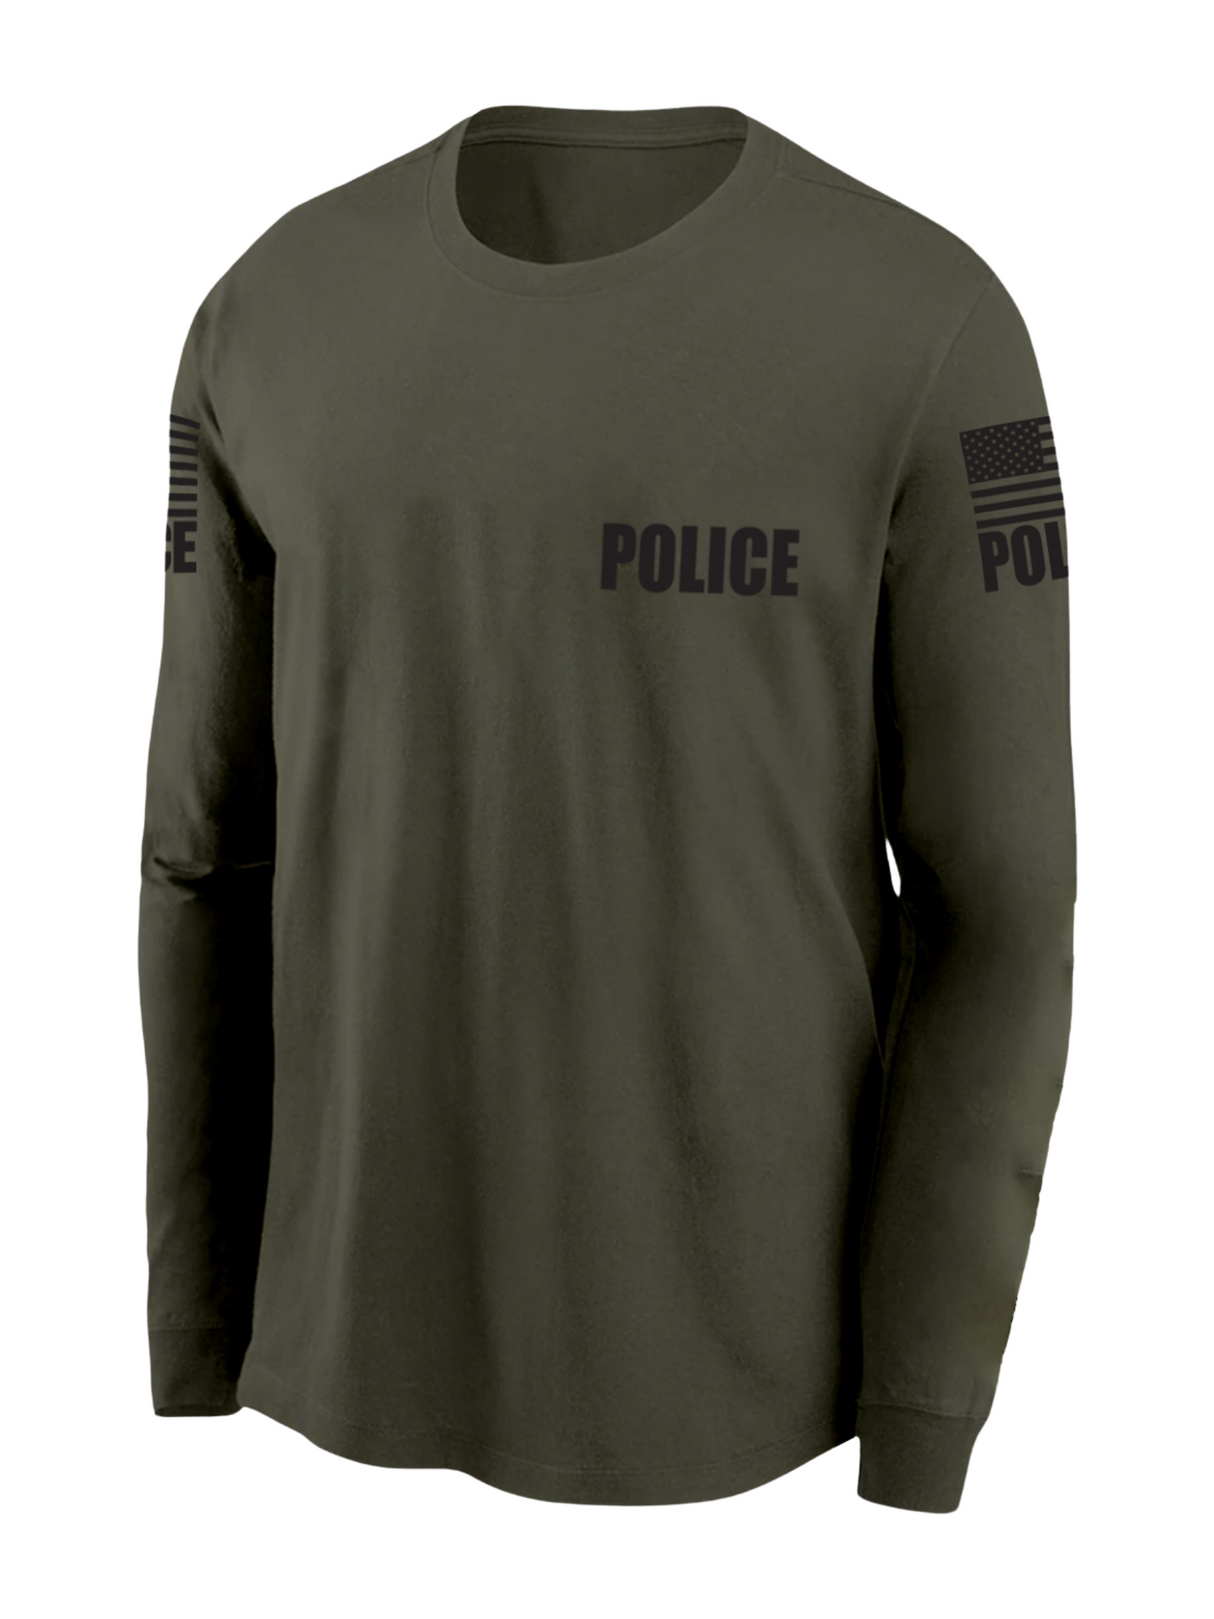 POLICE SHIRT MENS AND WOMENS